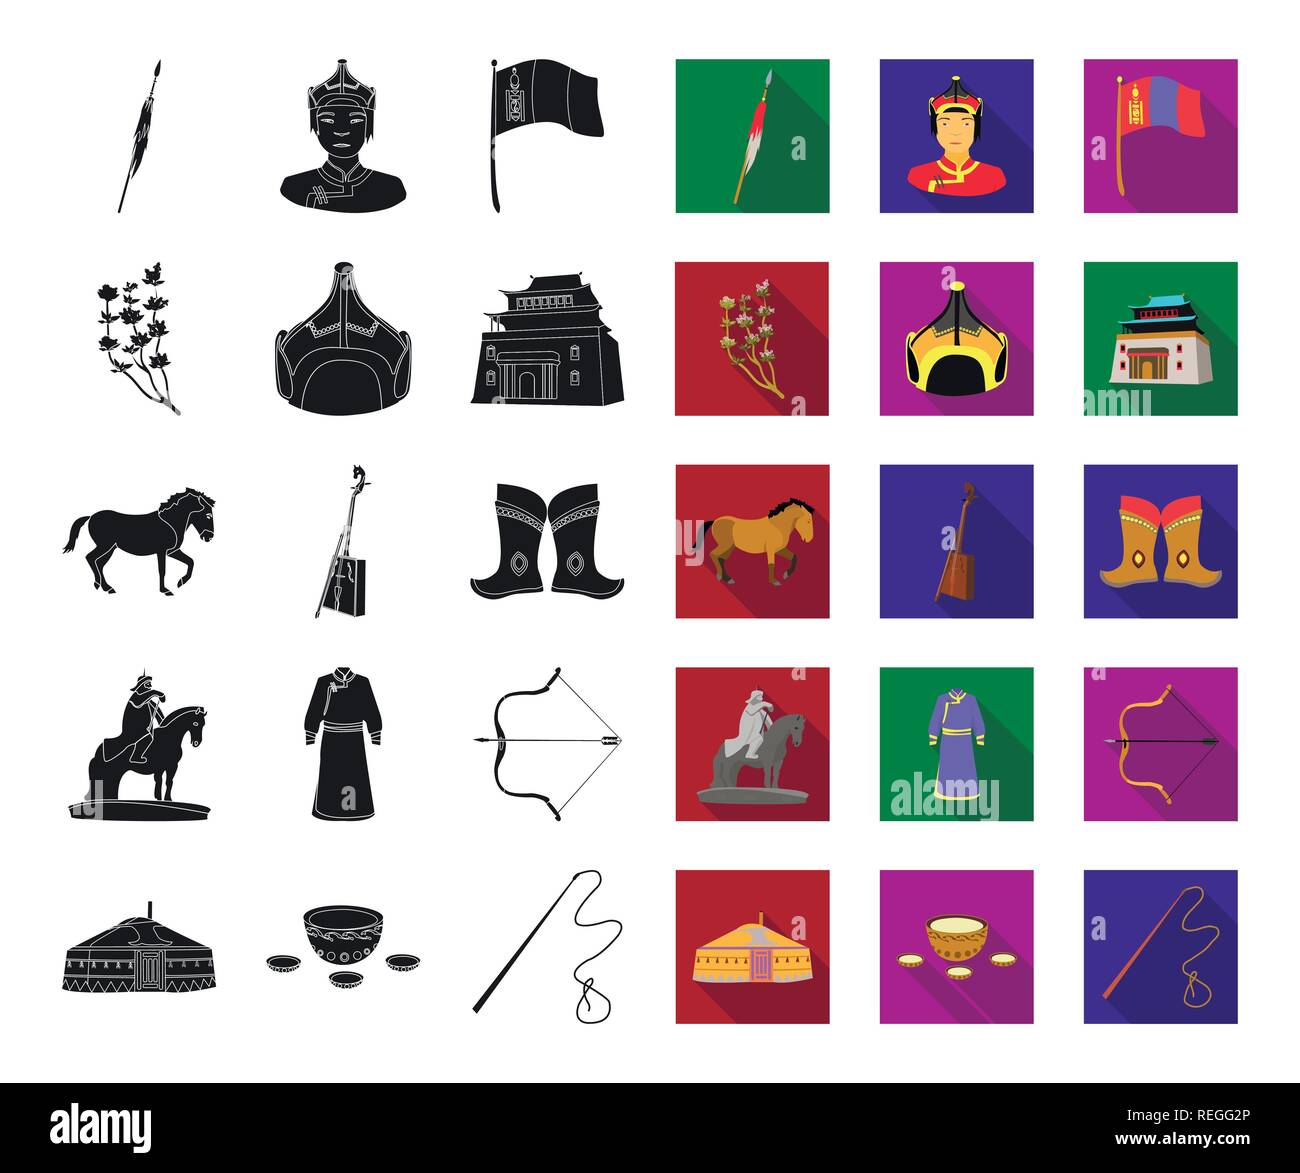 arms,arrow,belt,black,flat,bow,buddhism,building,cashmere,coat,collection,country,culture,flag,flower,fur,genghis,gutuly,headdress,horse,hudak,icon,illustration,instrument,khan,kialis,kumis,landmark,leather,map,monastery,mongol,mongolia,monument,musical,nature,religion,robe,set,shoes,sign,spear,temple,territory,tradition,travel,vector,whip,wool,yurt Vector Vectors , Stock Vector